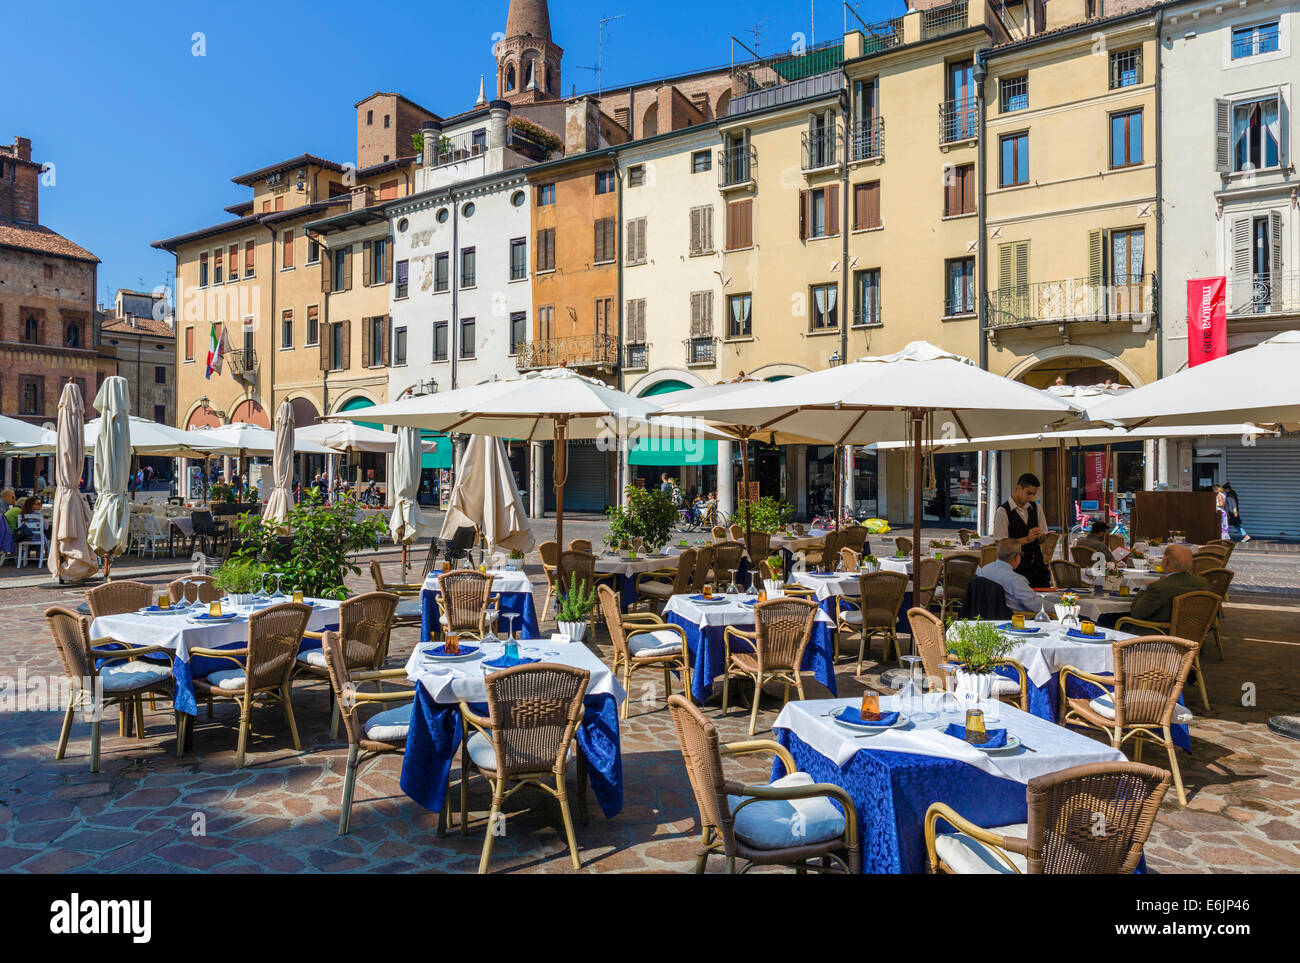 Restaurant in Piazza delle Erbe in the centre of the historic city of Mantua, Lombardy, Italy Stock Photo